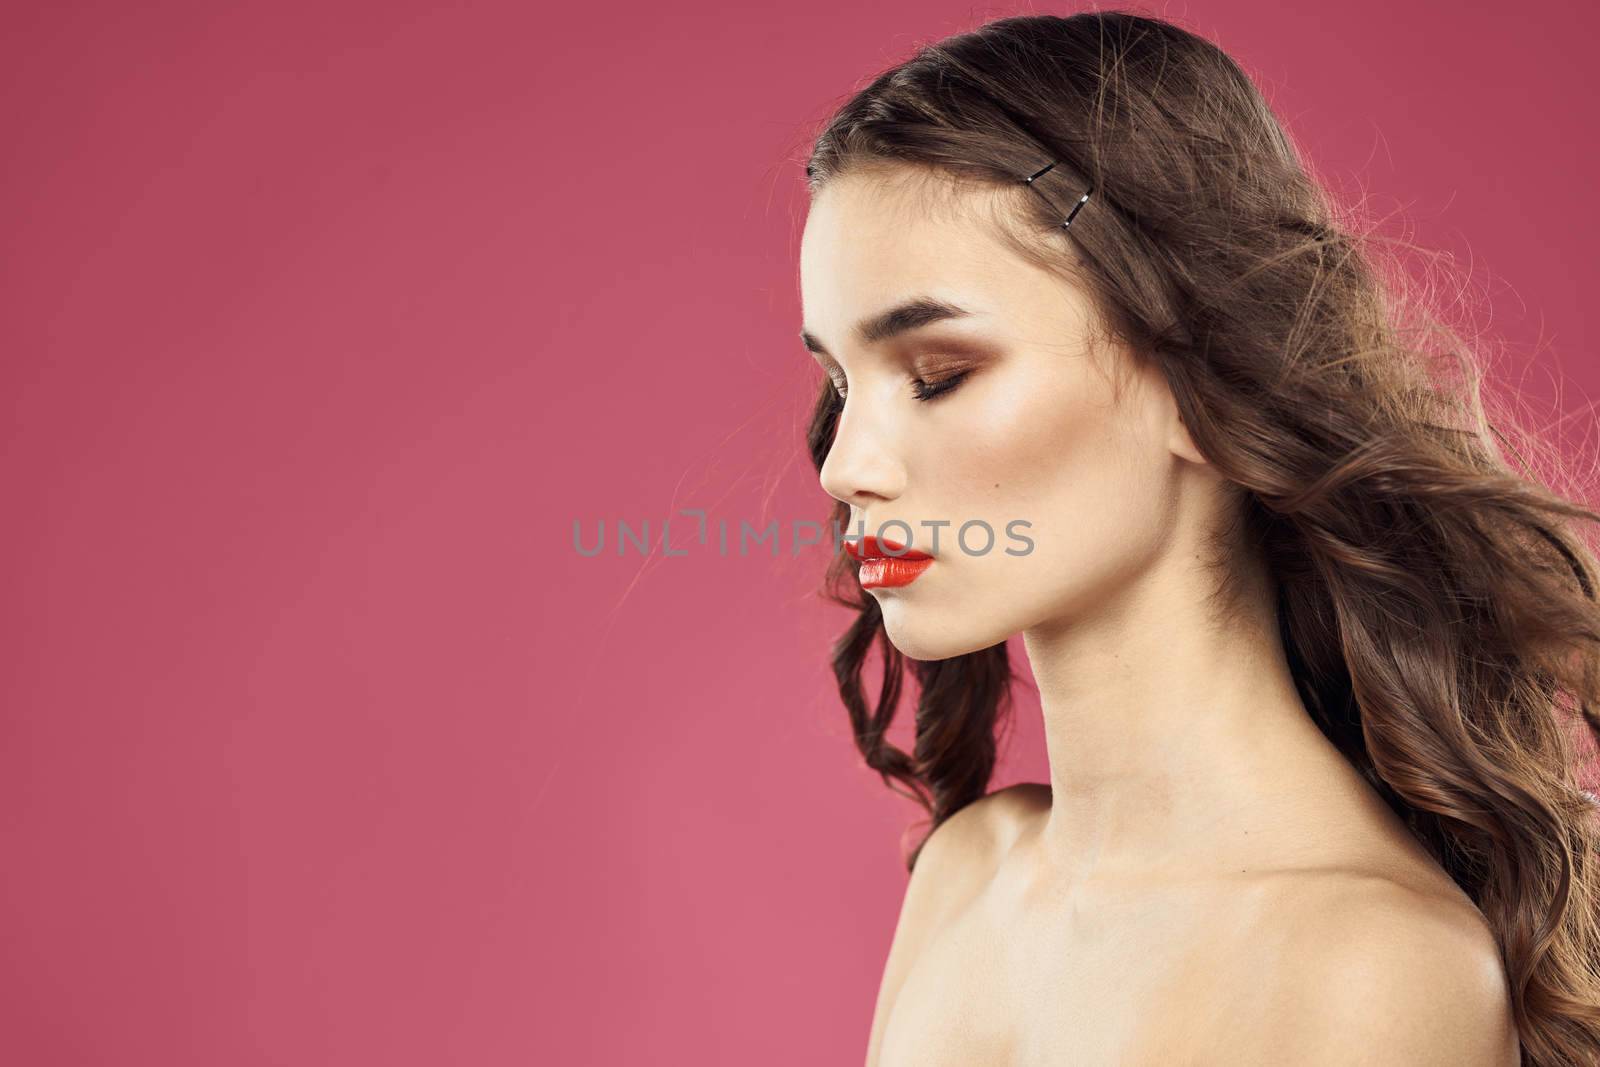 Beautiful brunette woman with makeup on her face on a pink background naked shoulders by SHOTPRIME